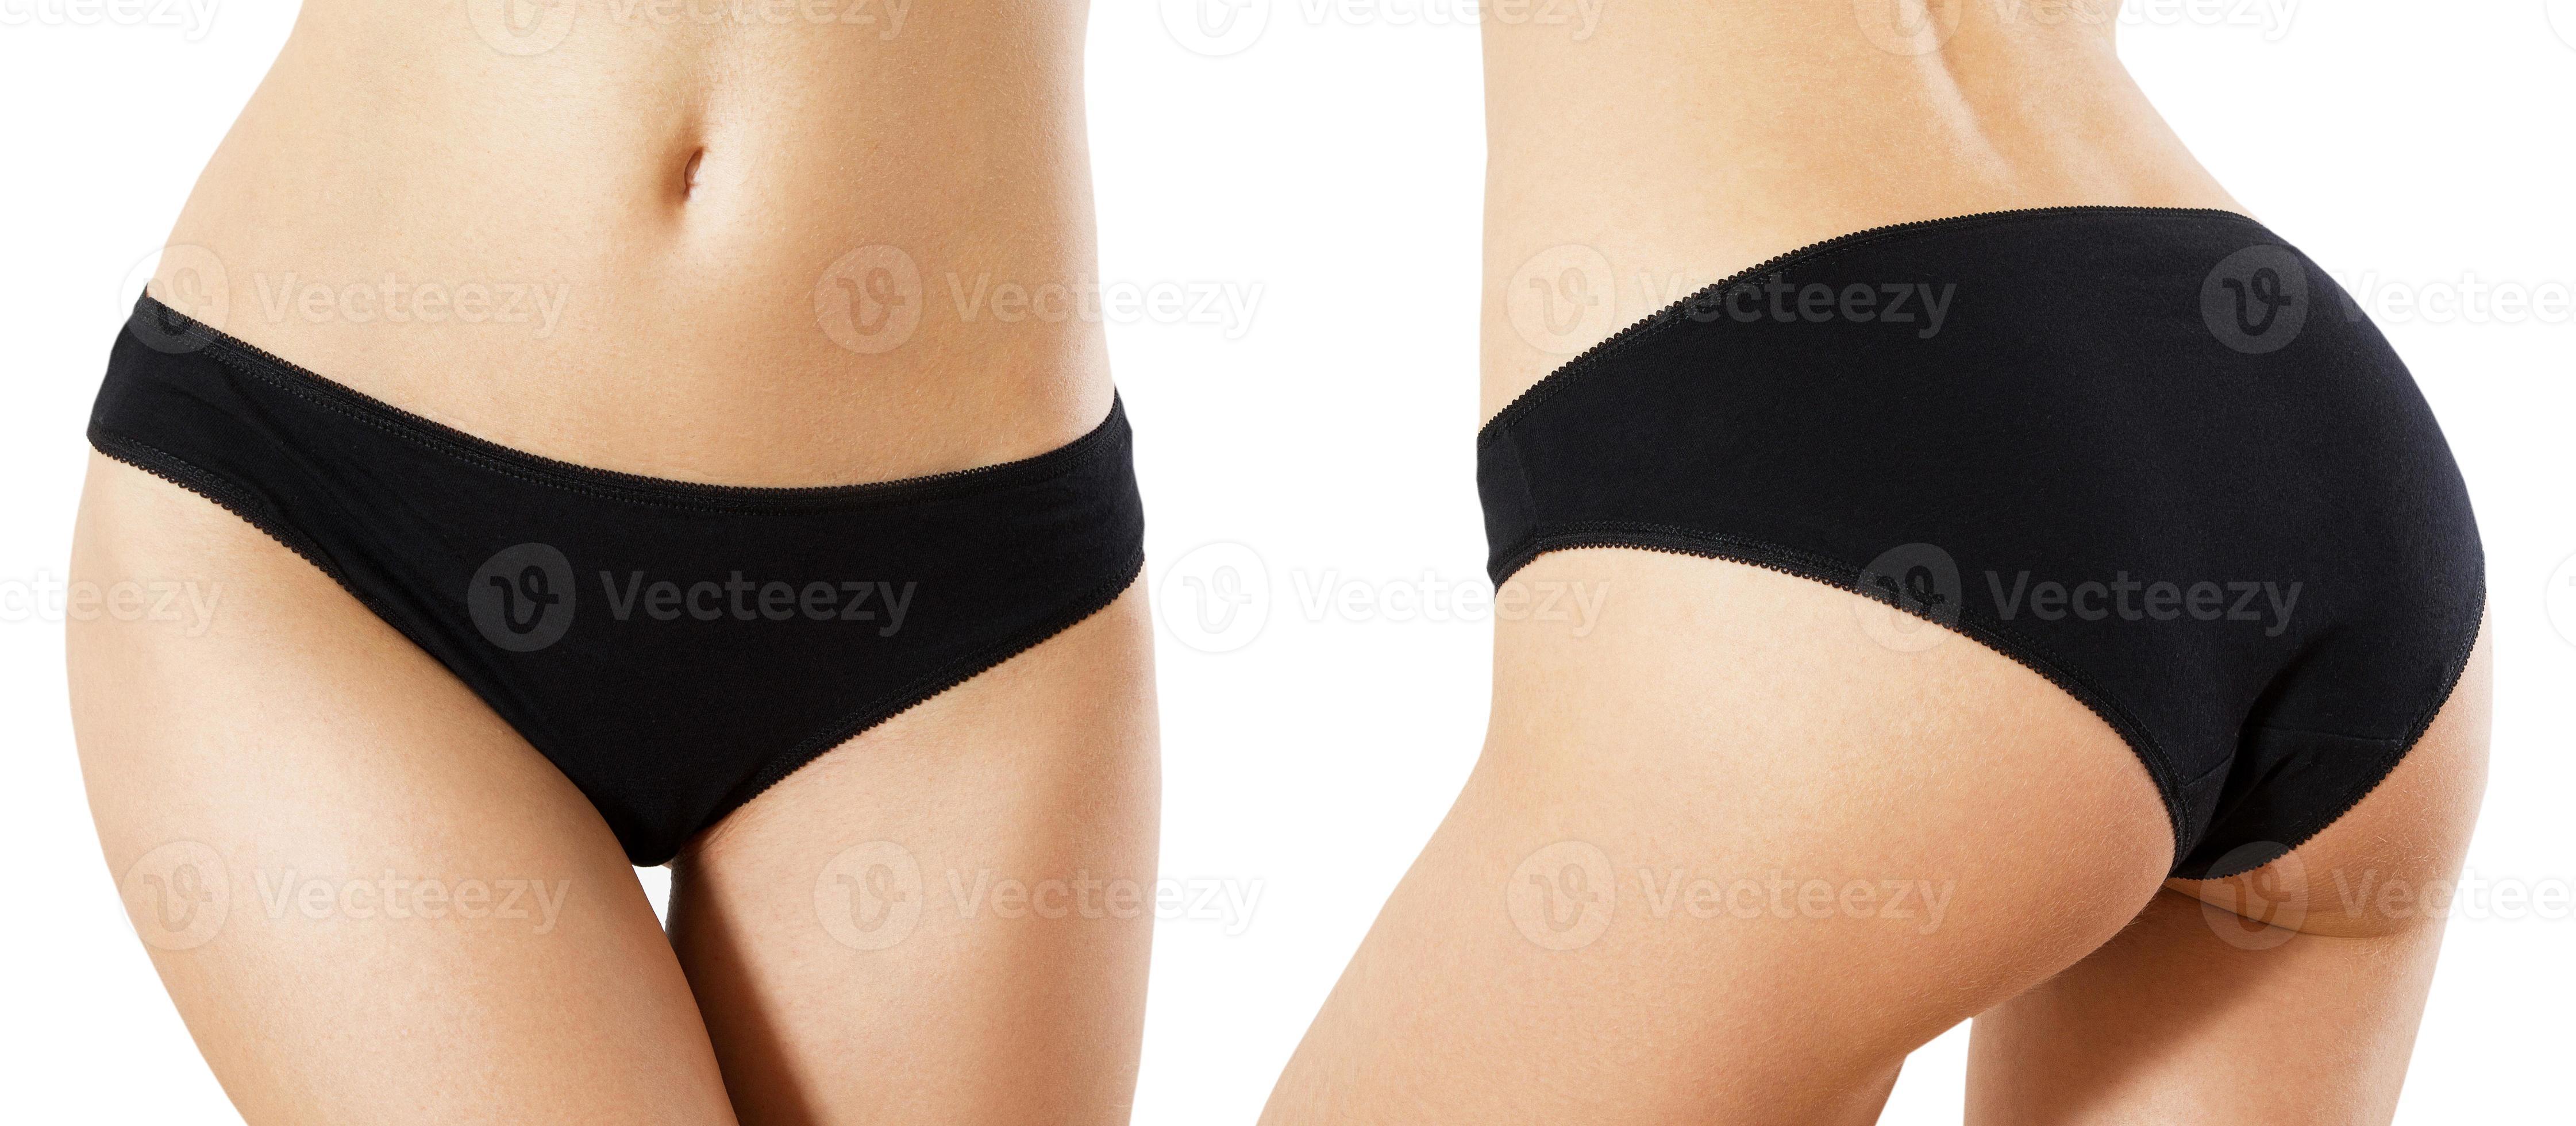 https://static.vecteezy.com/system/resources/previews/005/204/349/large_2x/panties-set-mockup-beautiful-woman-body-in-shape-closeup-healthy-girl-with-fit-slim-body-soft-skin-and-firm-buttocks-hips-in-black-bikini-panties-female-with-sexy-front-and-back-photo.jpg